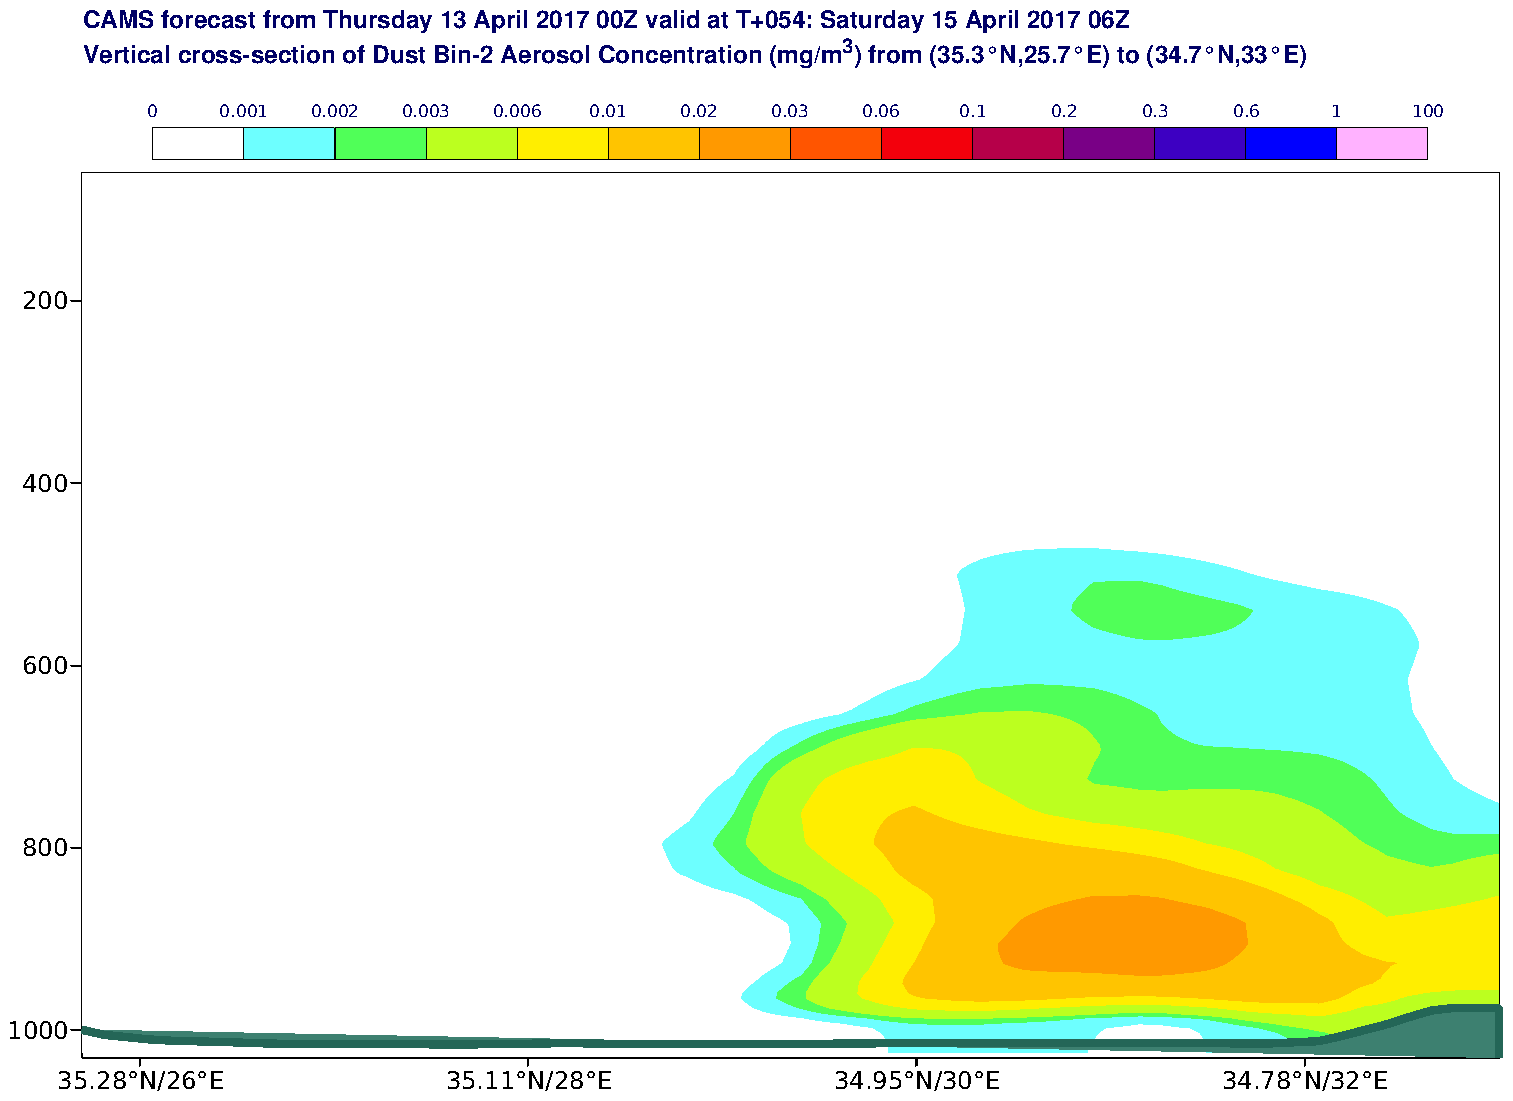 Vertical cross-section of Dust Bin-2 Aerosol Concentration (mg/m3) valid at T54 - 2017-04-15 06:00